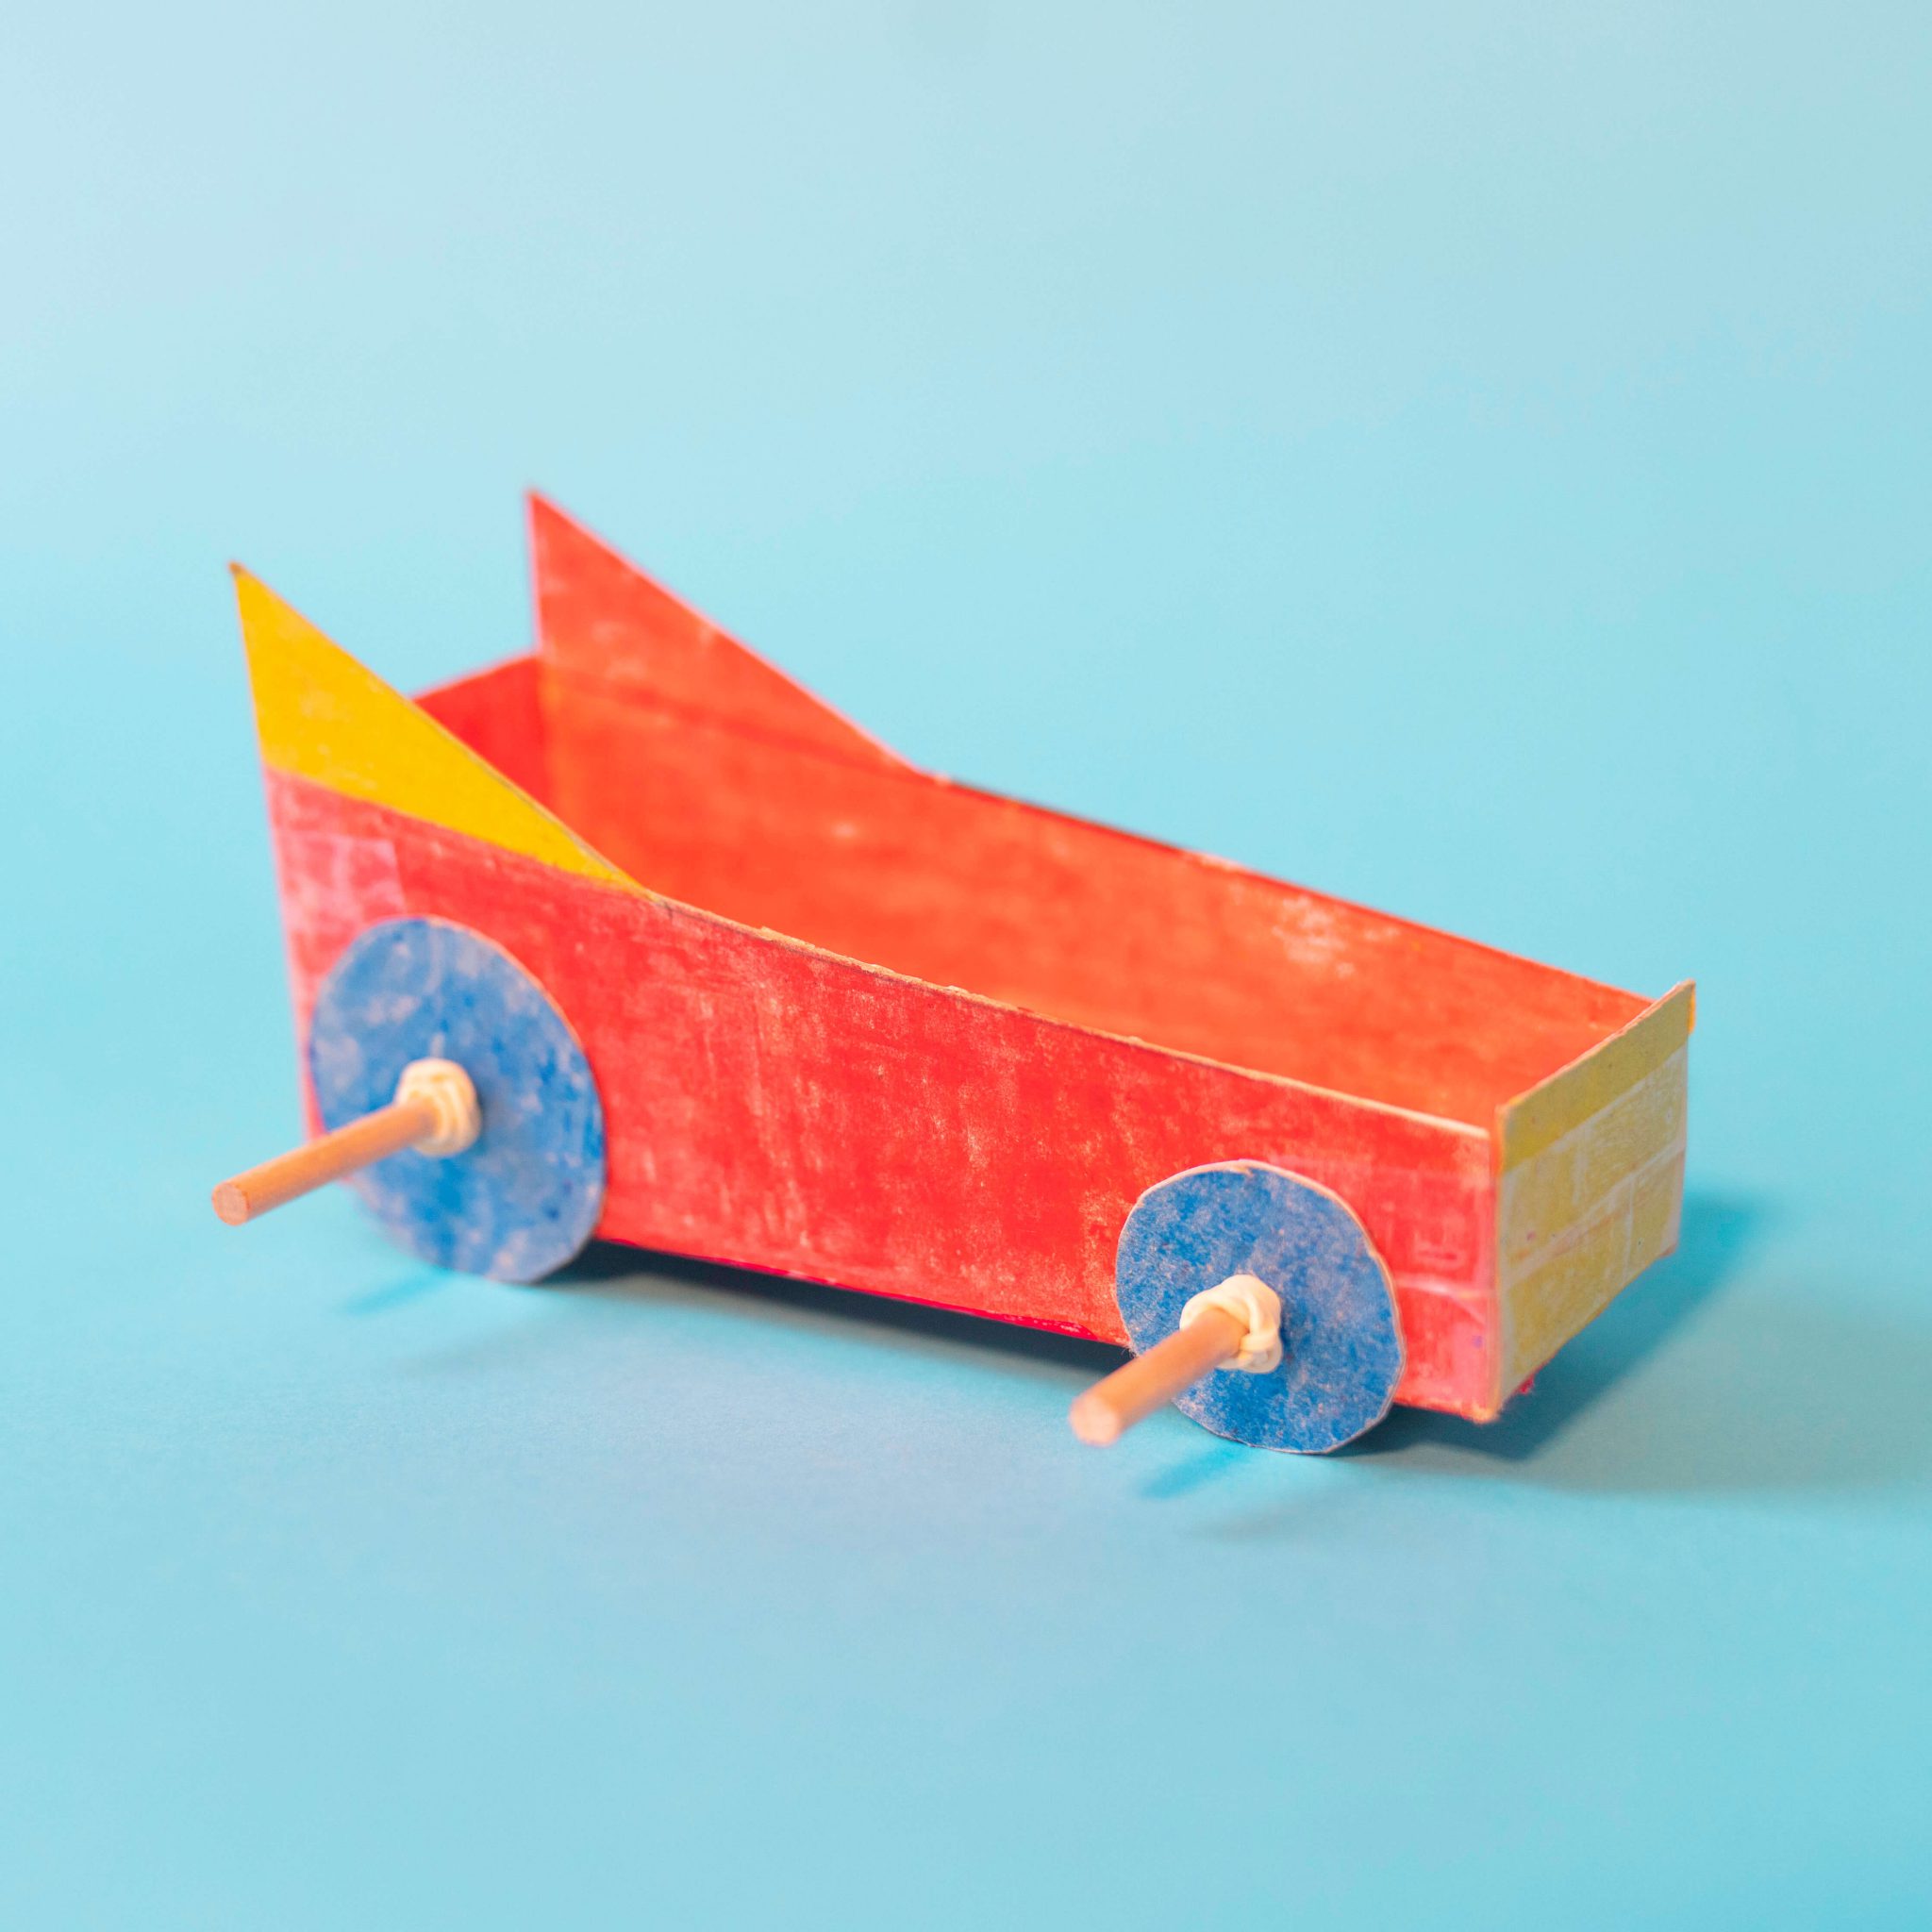 Red, yellow and blue paper car craft on a blue background.